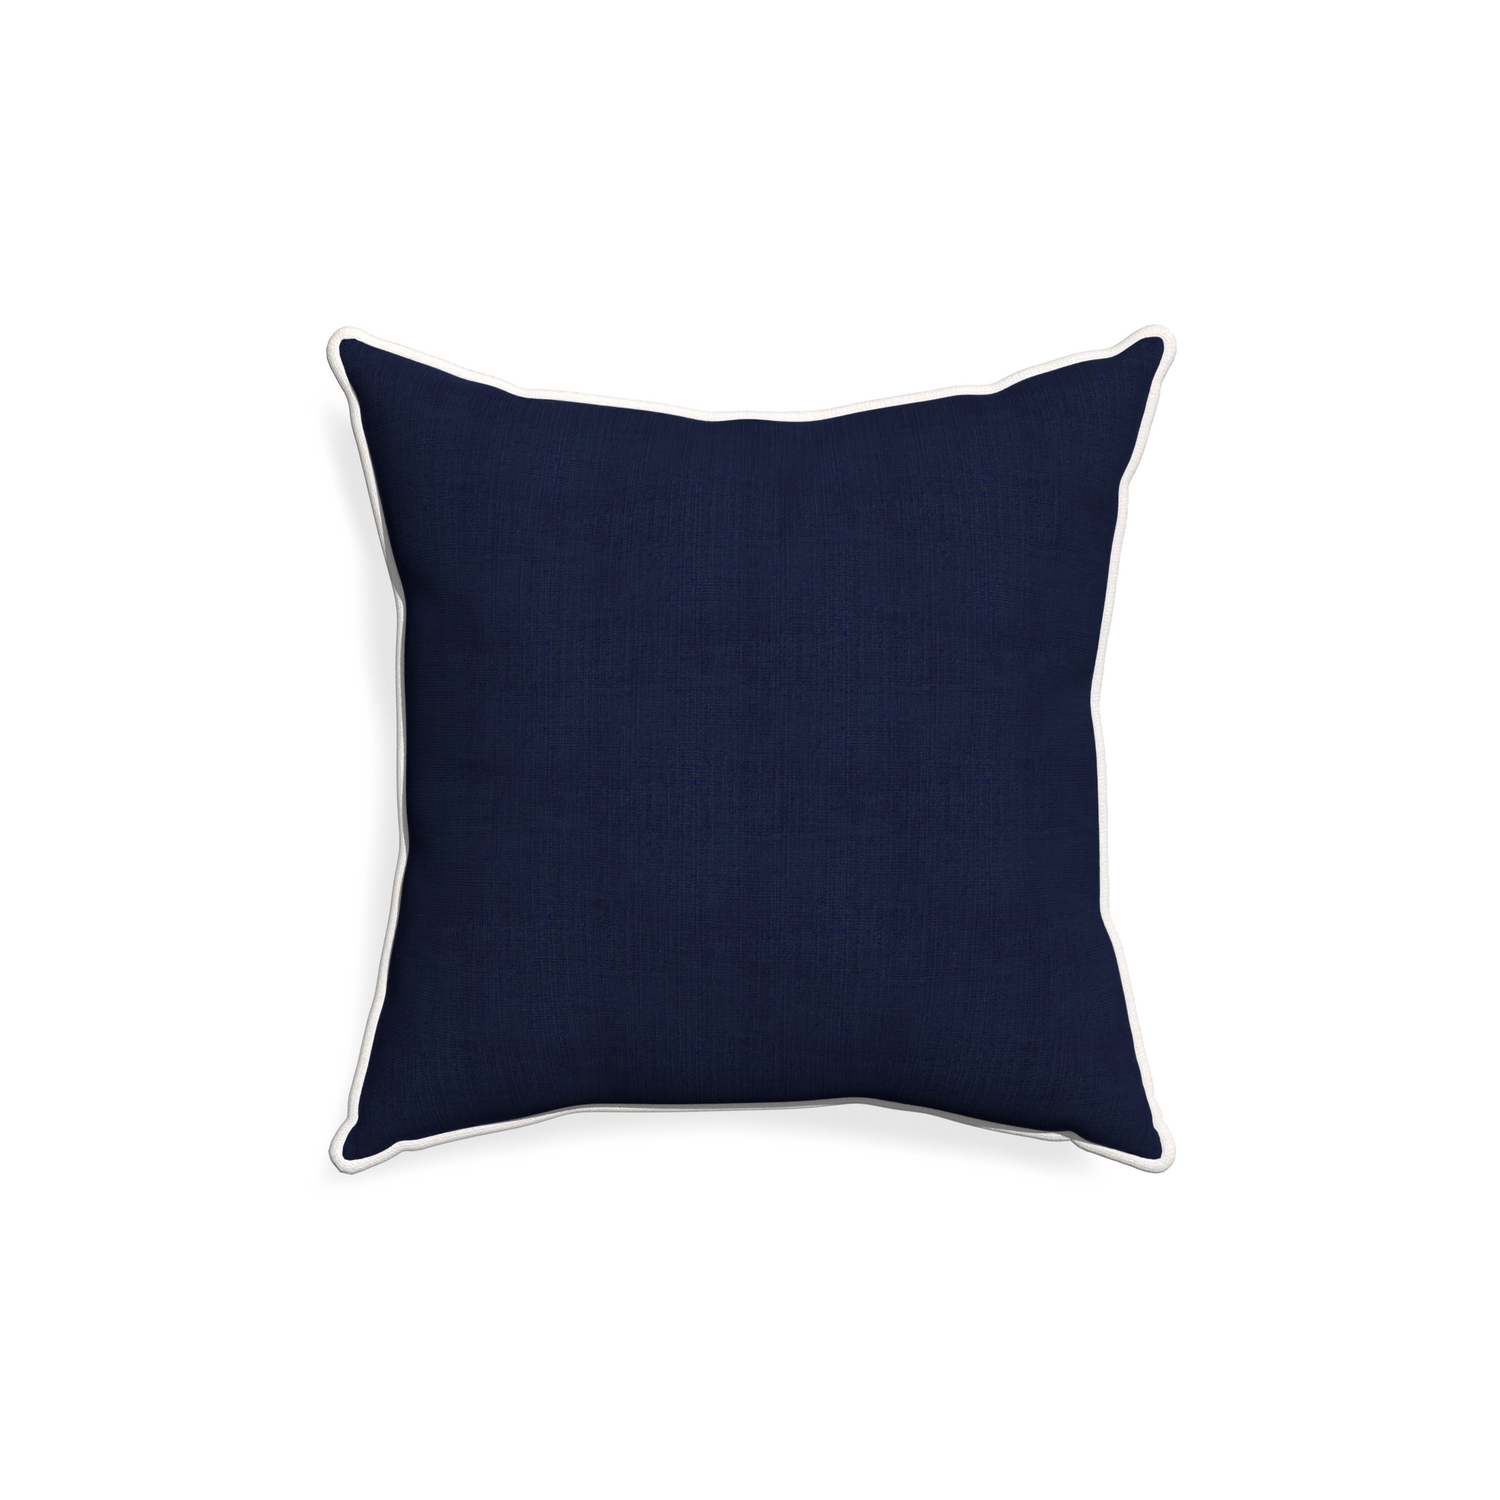 18-square midnight custom pillow with snow piping on white background